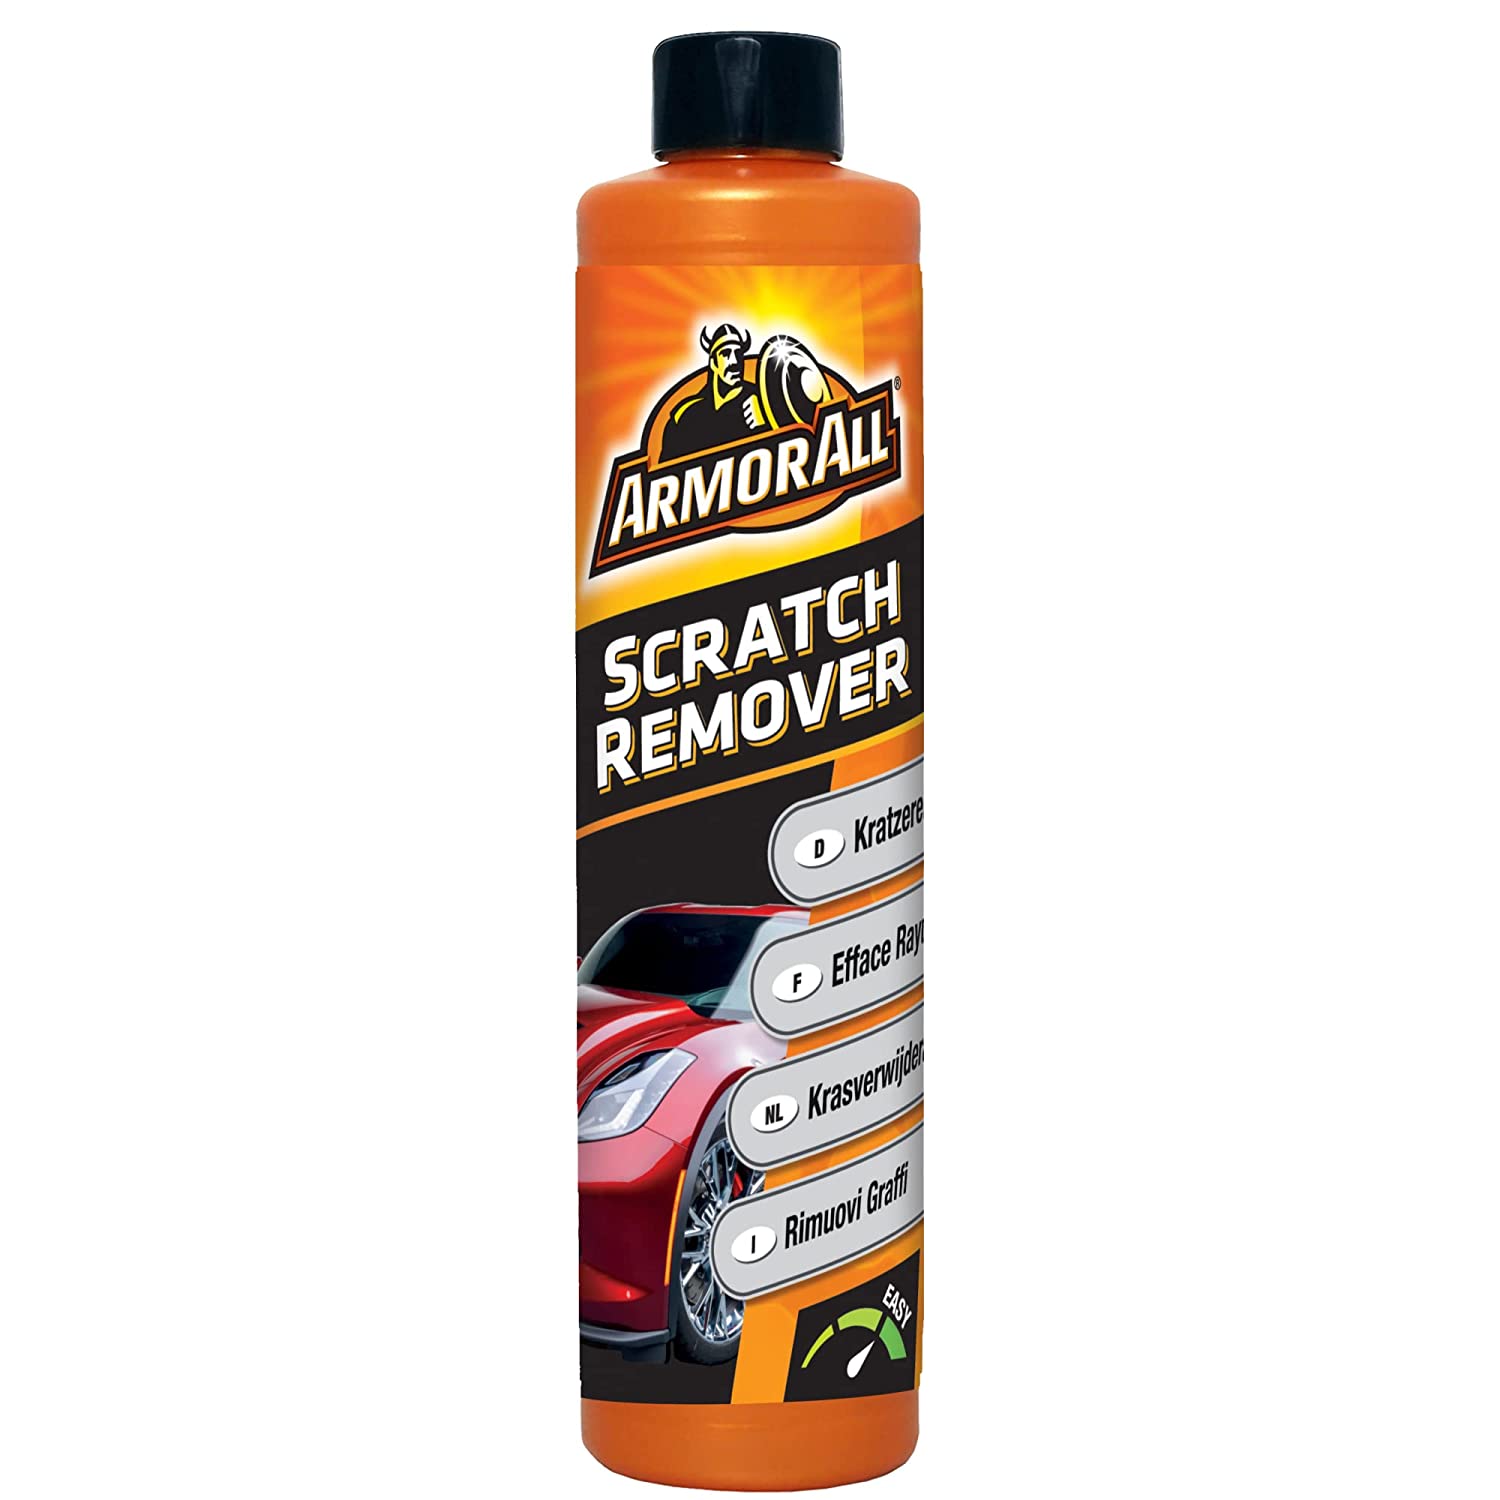 Armorall Scratch Remover